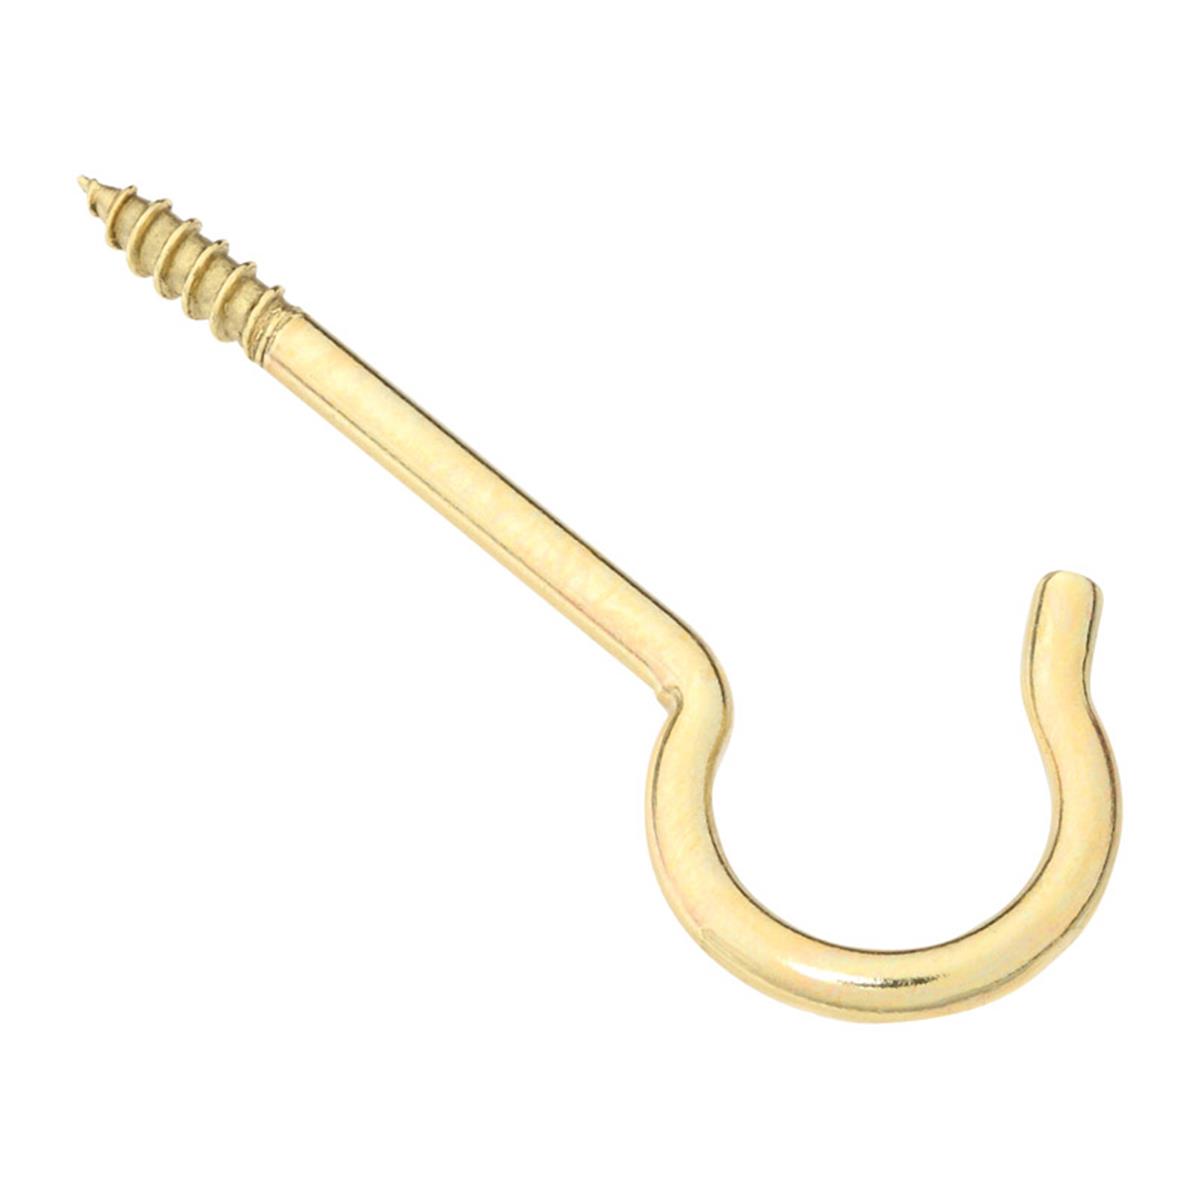 5705850 3.37 In. Ceiling Hook, Solid Brass - Pack Of 2